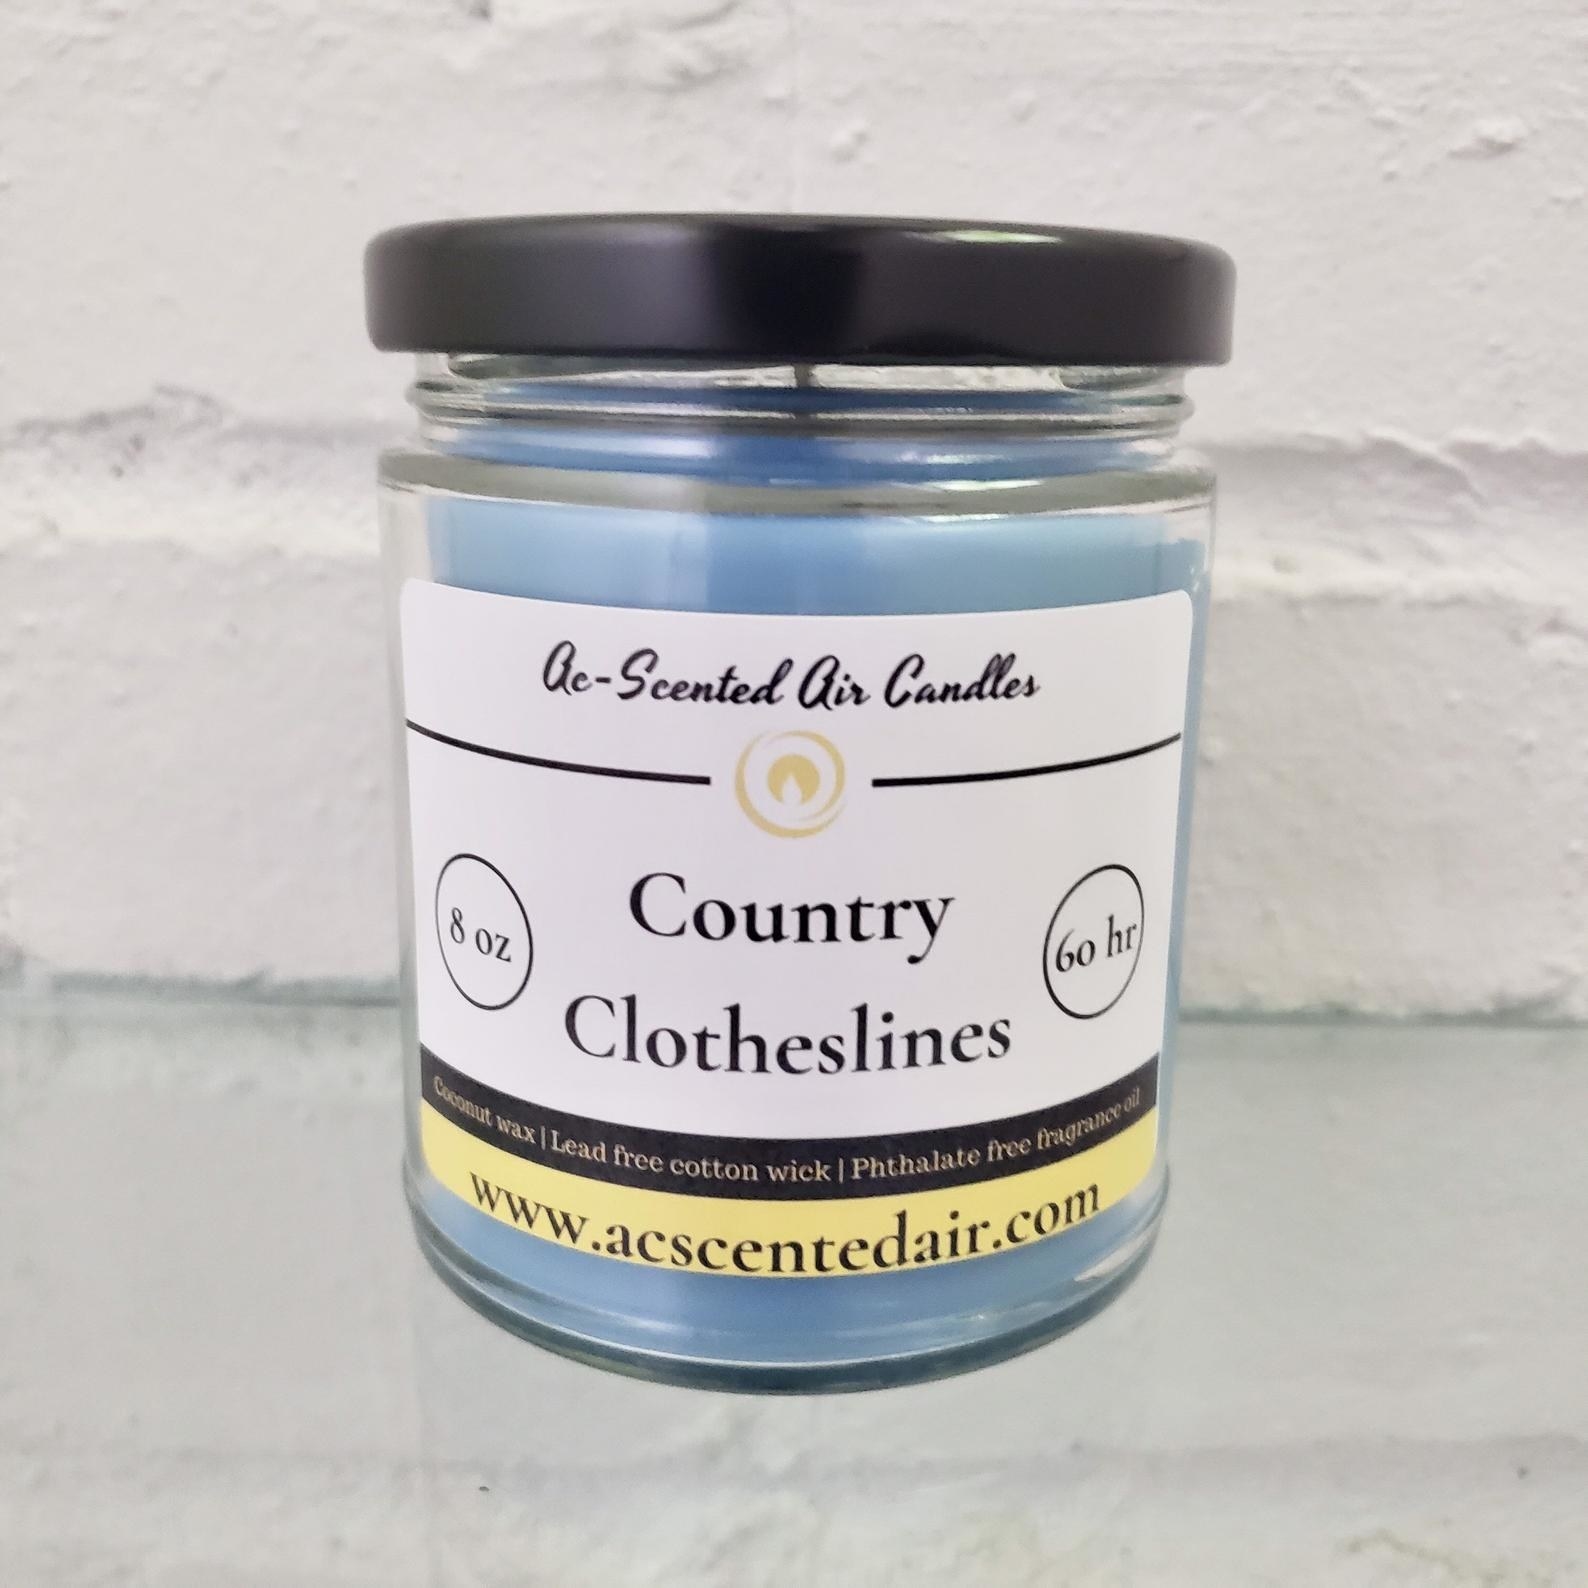 A scented candle in the country clothesline fragrance 